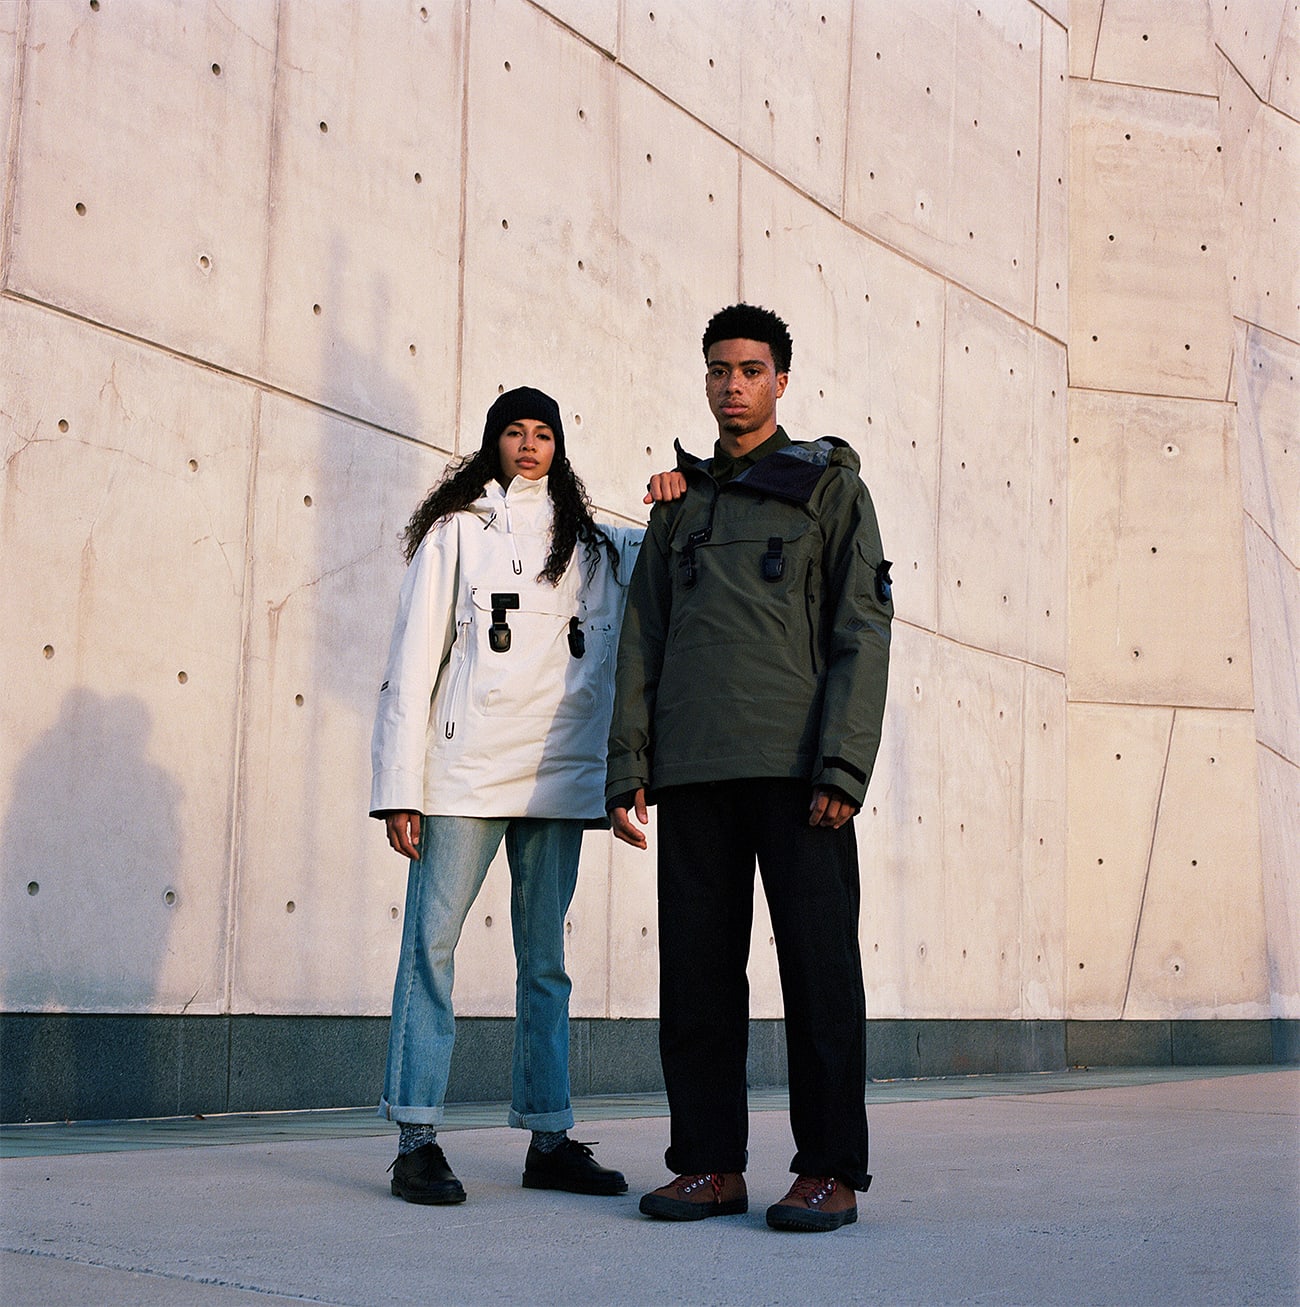 Models Julia Biango and Leron Nurse wearing Armada ski outerwear jackets, her jacket is white his jacket is army green. She is wearing a black hat. They are standing in front of a tall white building, her arm is on his shoulder. The male model has a lot of freckles. Look-book photographed by New York photographer Maria Bruun. The image was taken using the Hasselblad 500CM camera and Kodak Portra film.